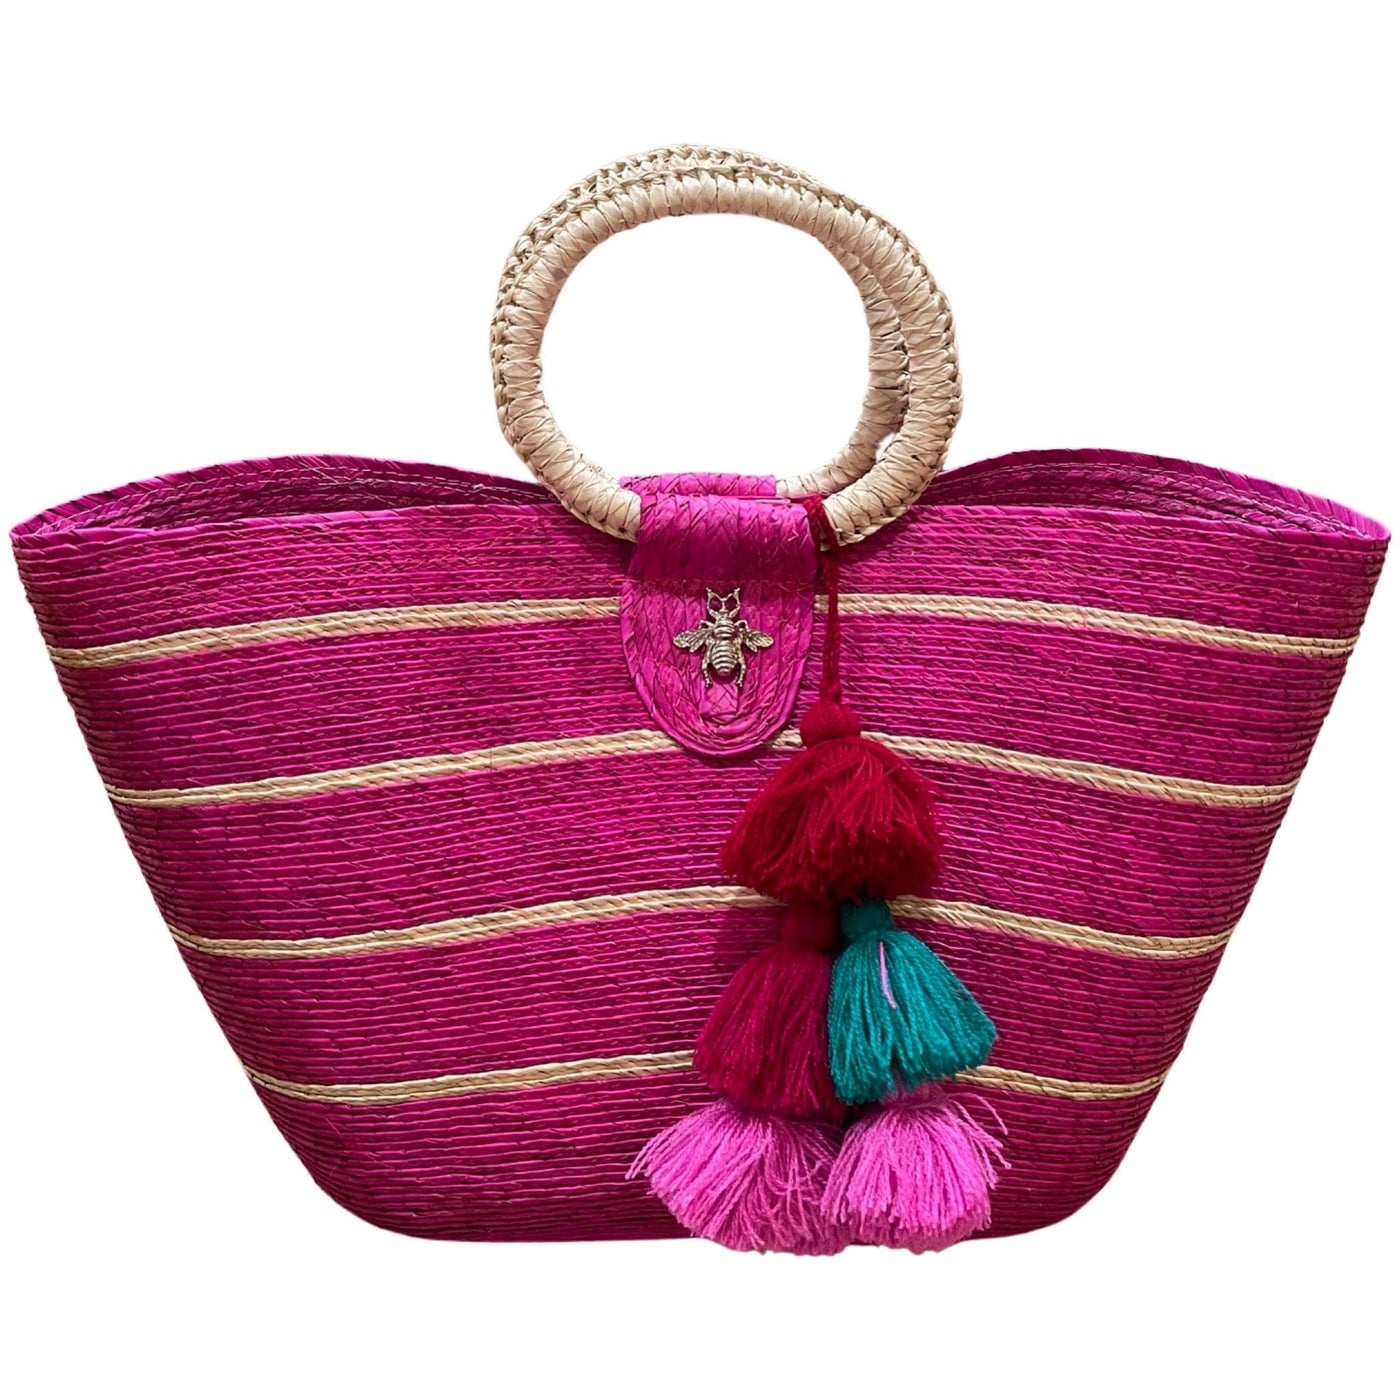 BeeLoved Custom Artisan Bags and Gifts Handbags Fuchsia Hot Pink Stripe Palm Tote